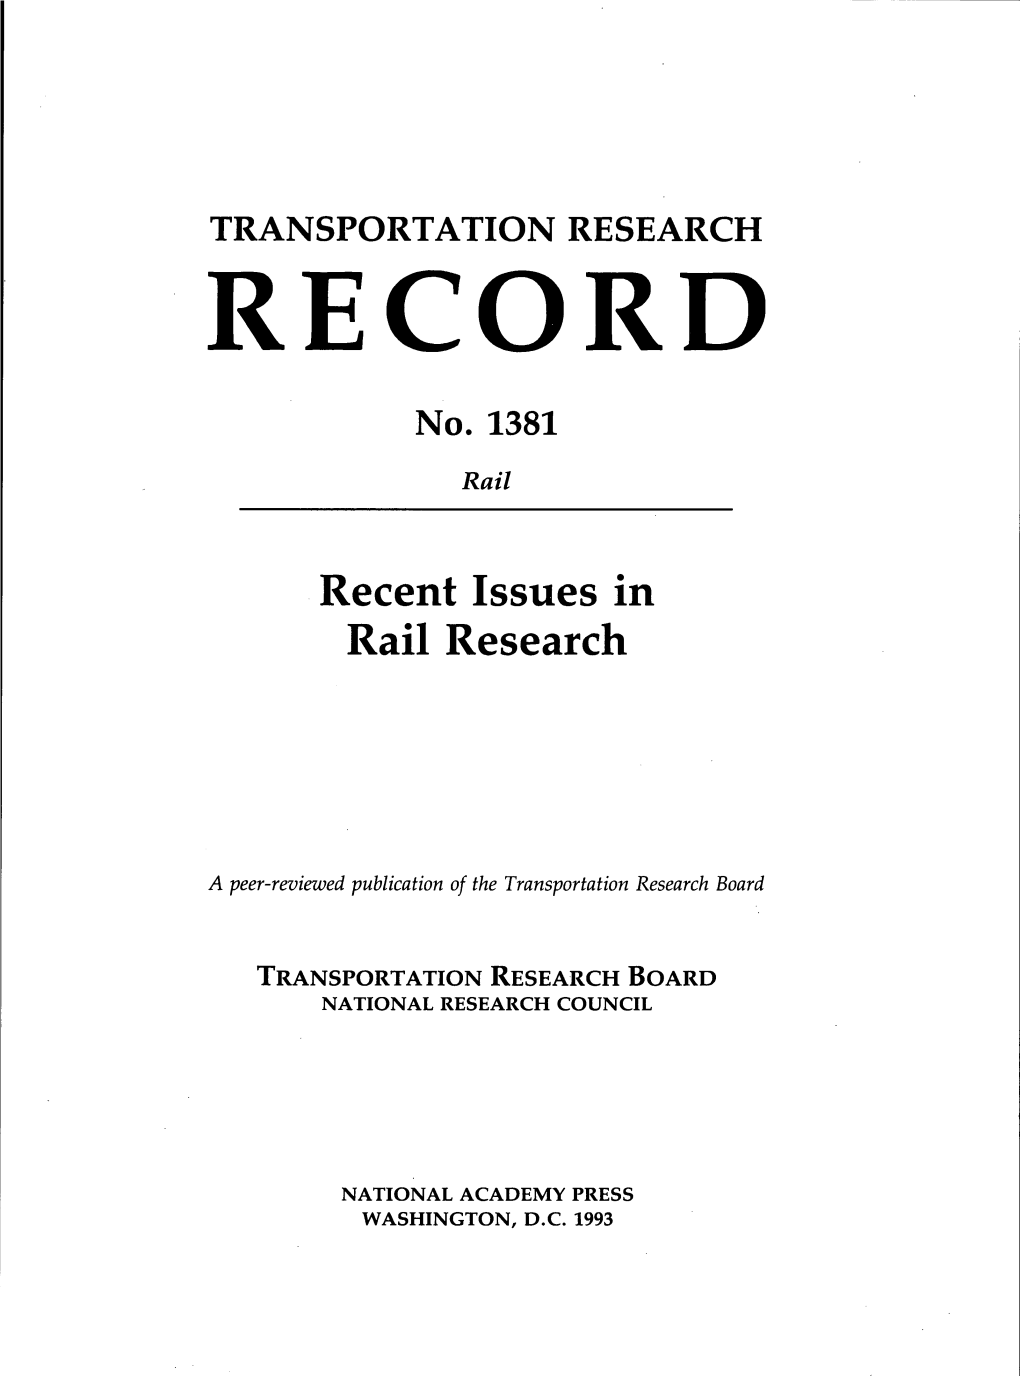 Recent Issues in Rail Research